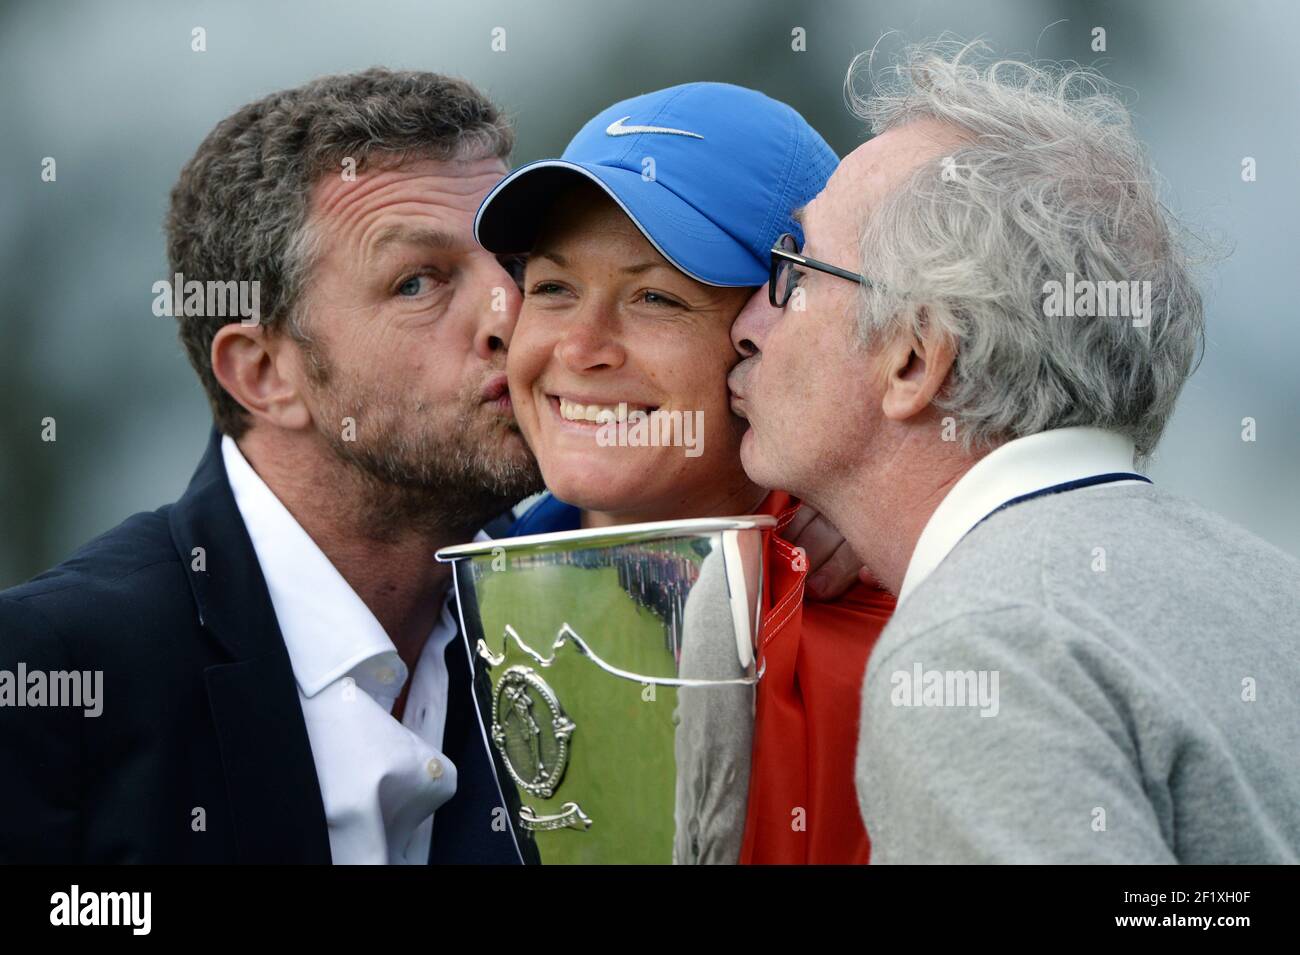 Golf - The Evian Championship 2013 - Evian - France - 9 -15/09/2013 - Photo Philippe Millereau / KMSP / DPPI - 15/09/2013 - Day 7 - Third round and final round - Suzann Pettersen / Nor - Winner - Jacques Bungert / Tournament director - Franck Riboud / CEO Danone Stock Photo